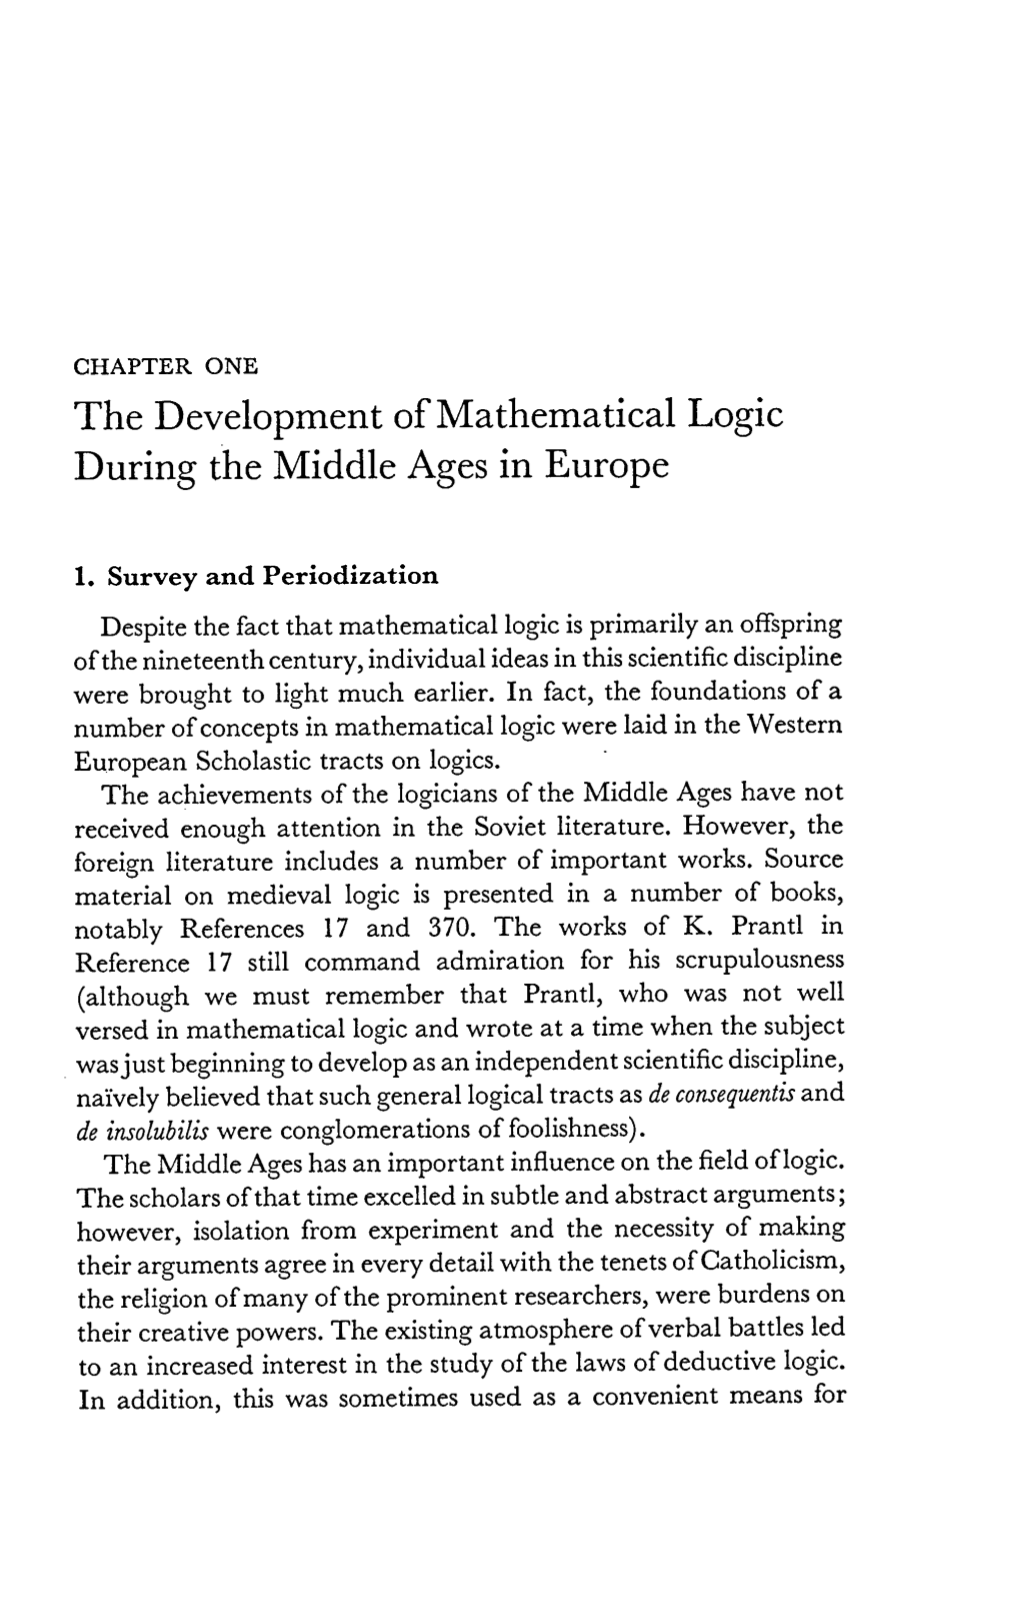 The Development of Mathematical Logic During the Middle Ages in Europe